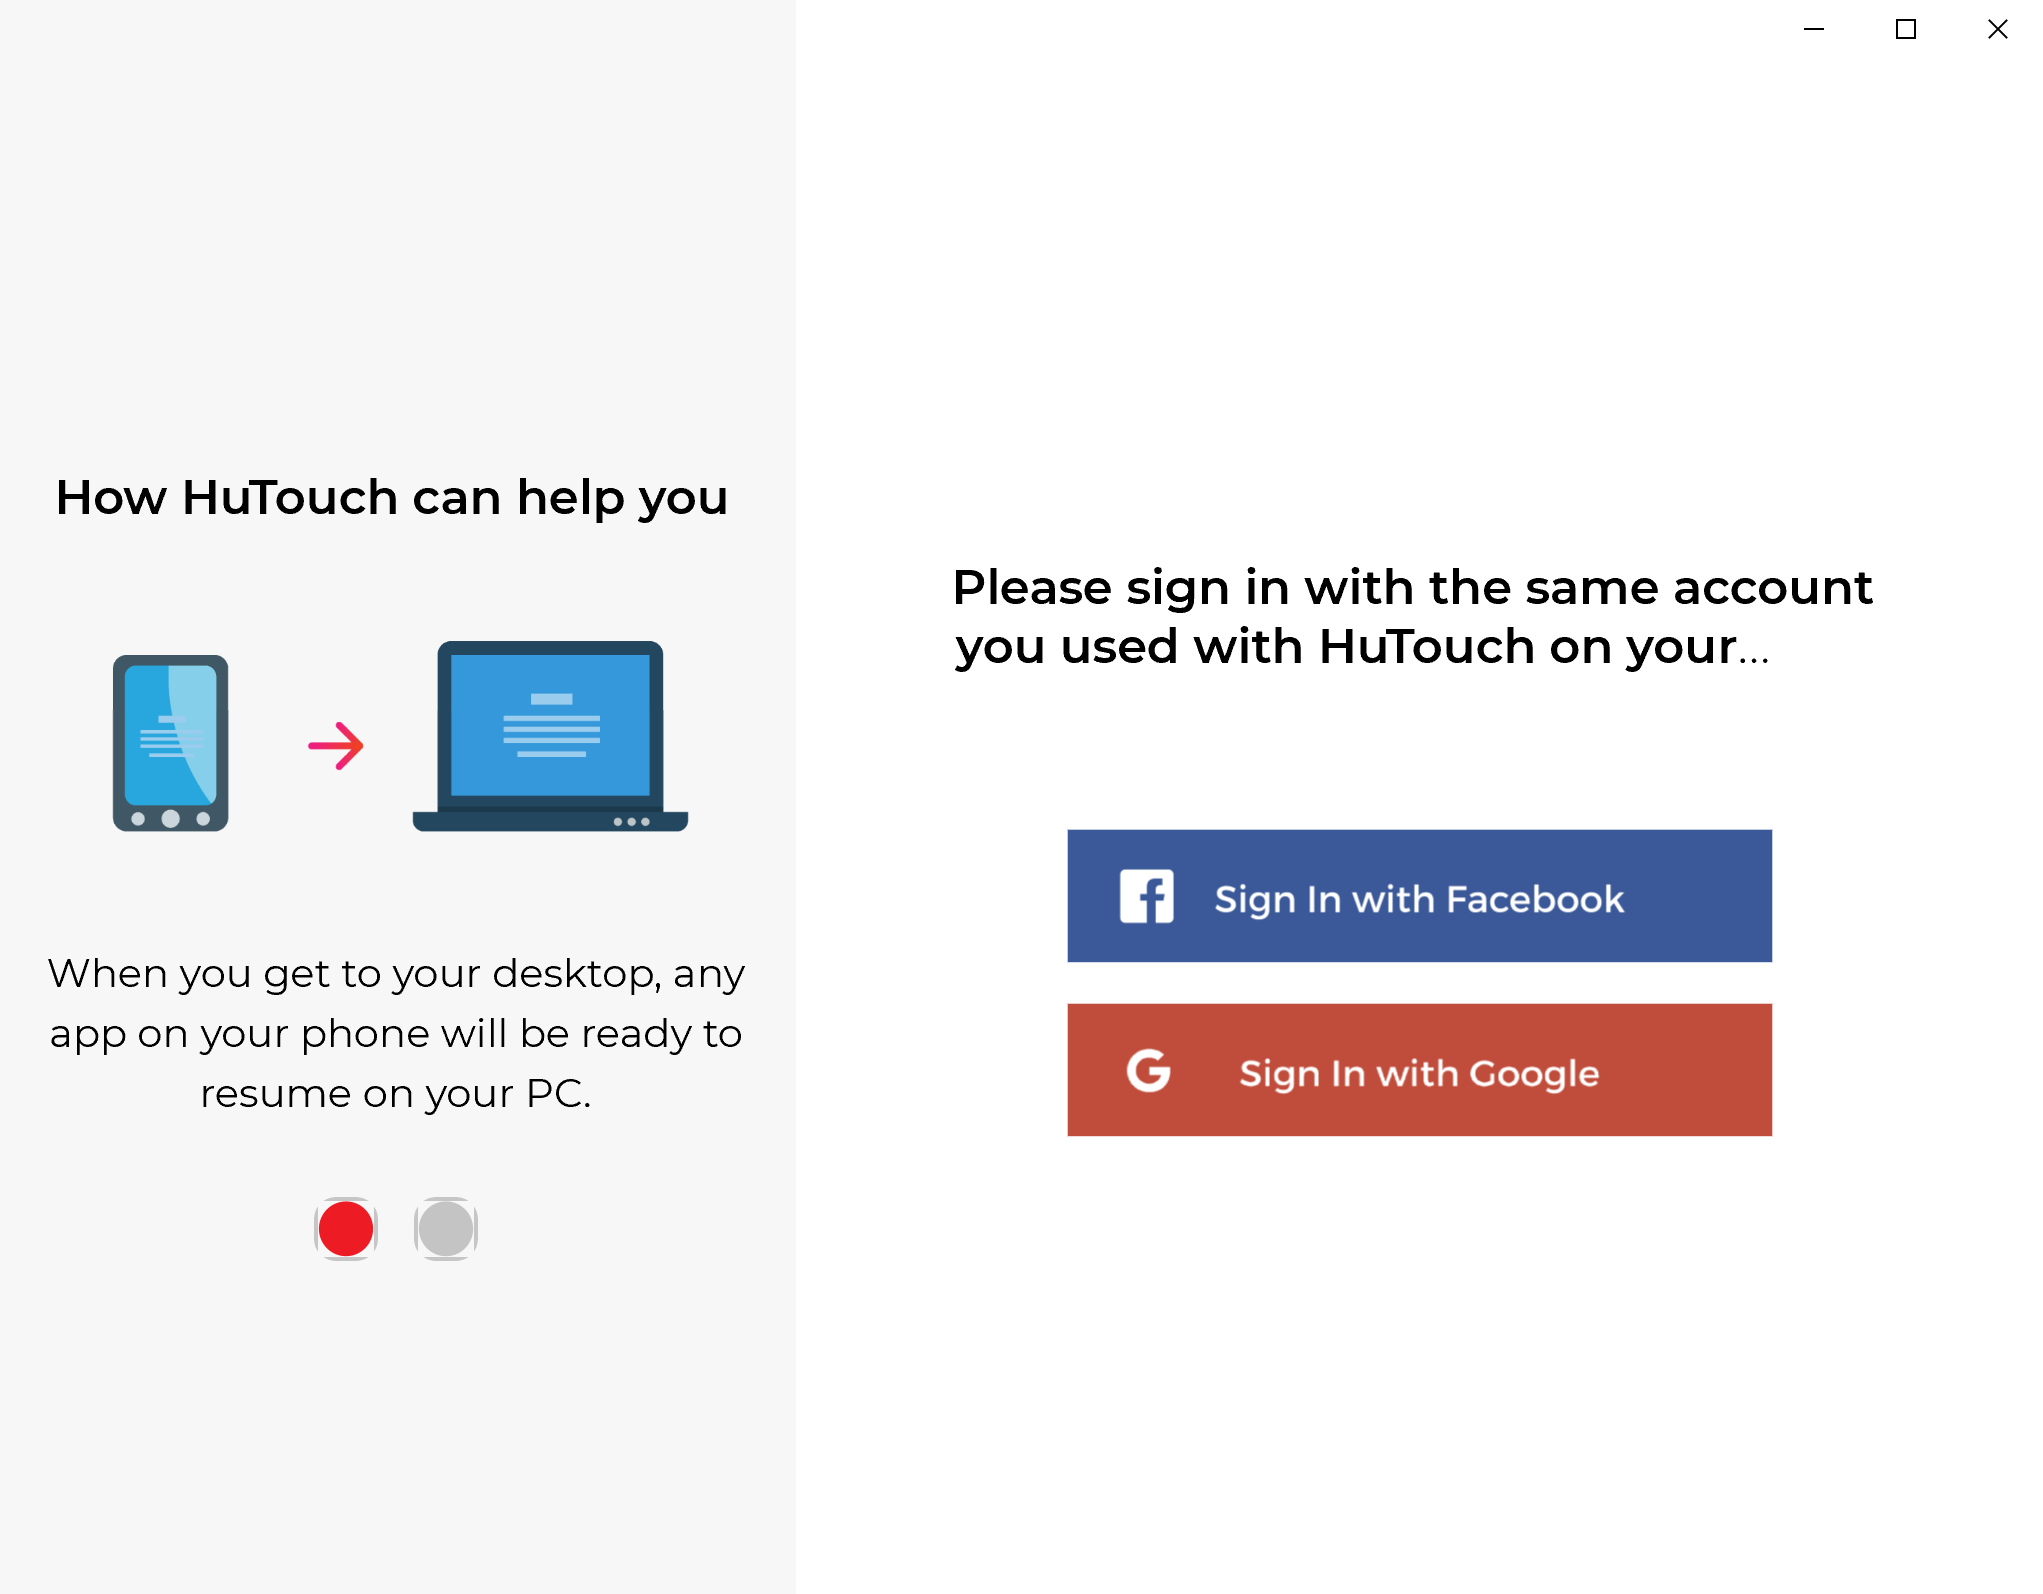 Login using your Google account to allow HuTouch to send your tasks on Google apps between devices